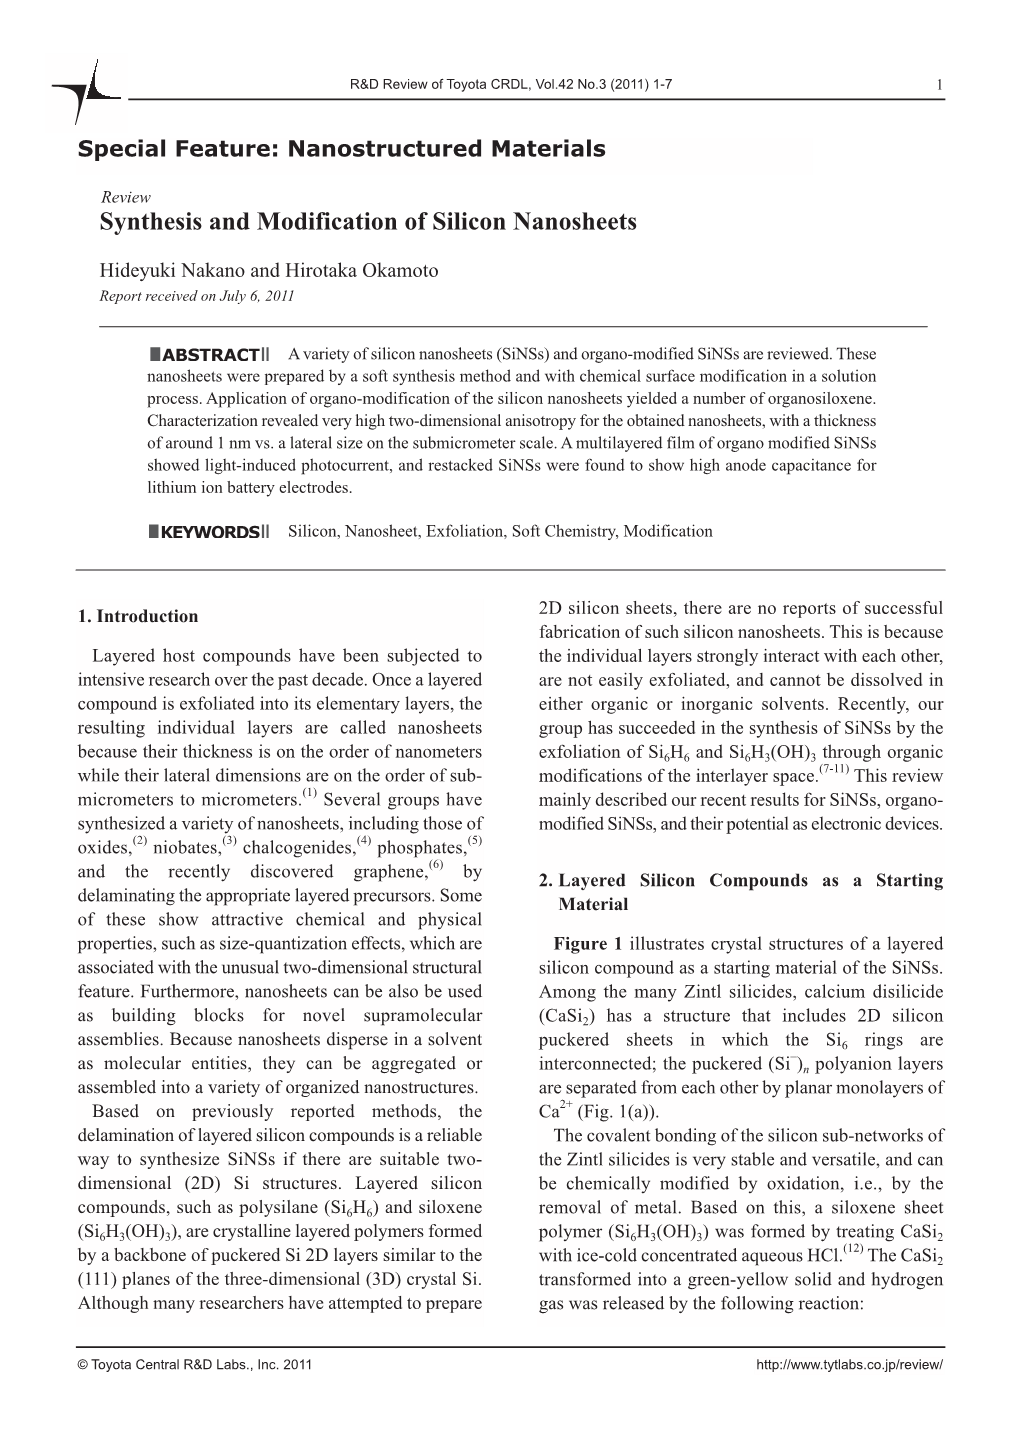 2. Synthesis and Modification of Silicon Nanosheets (893Kb)